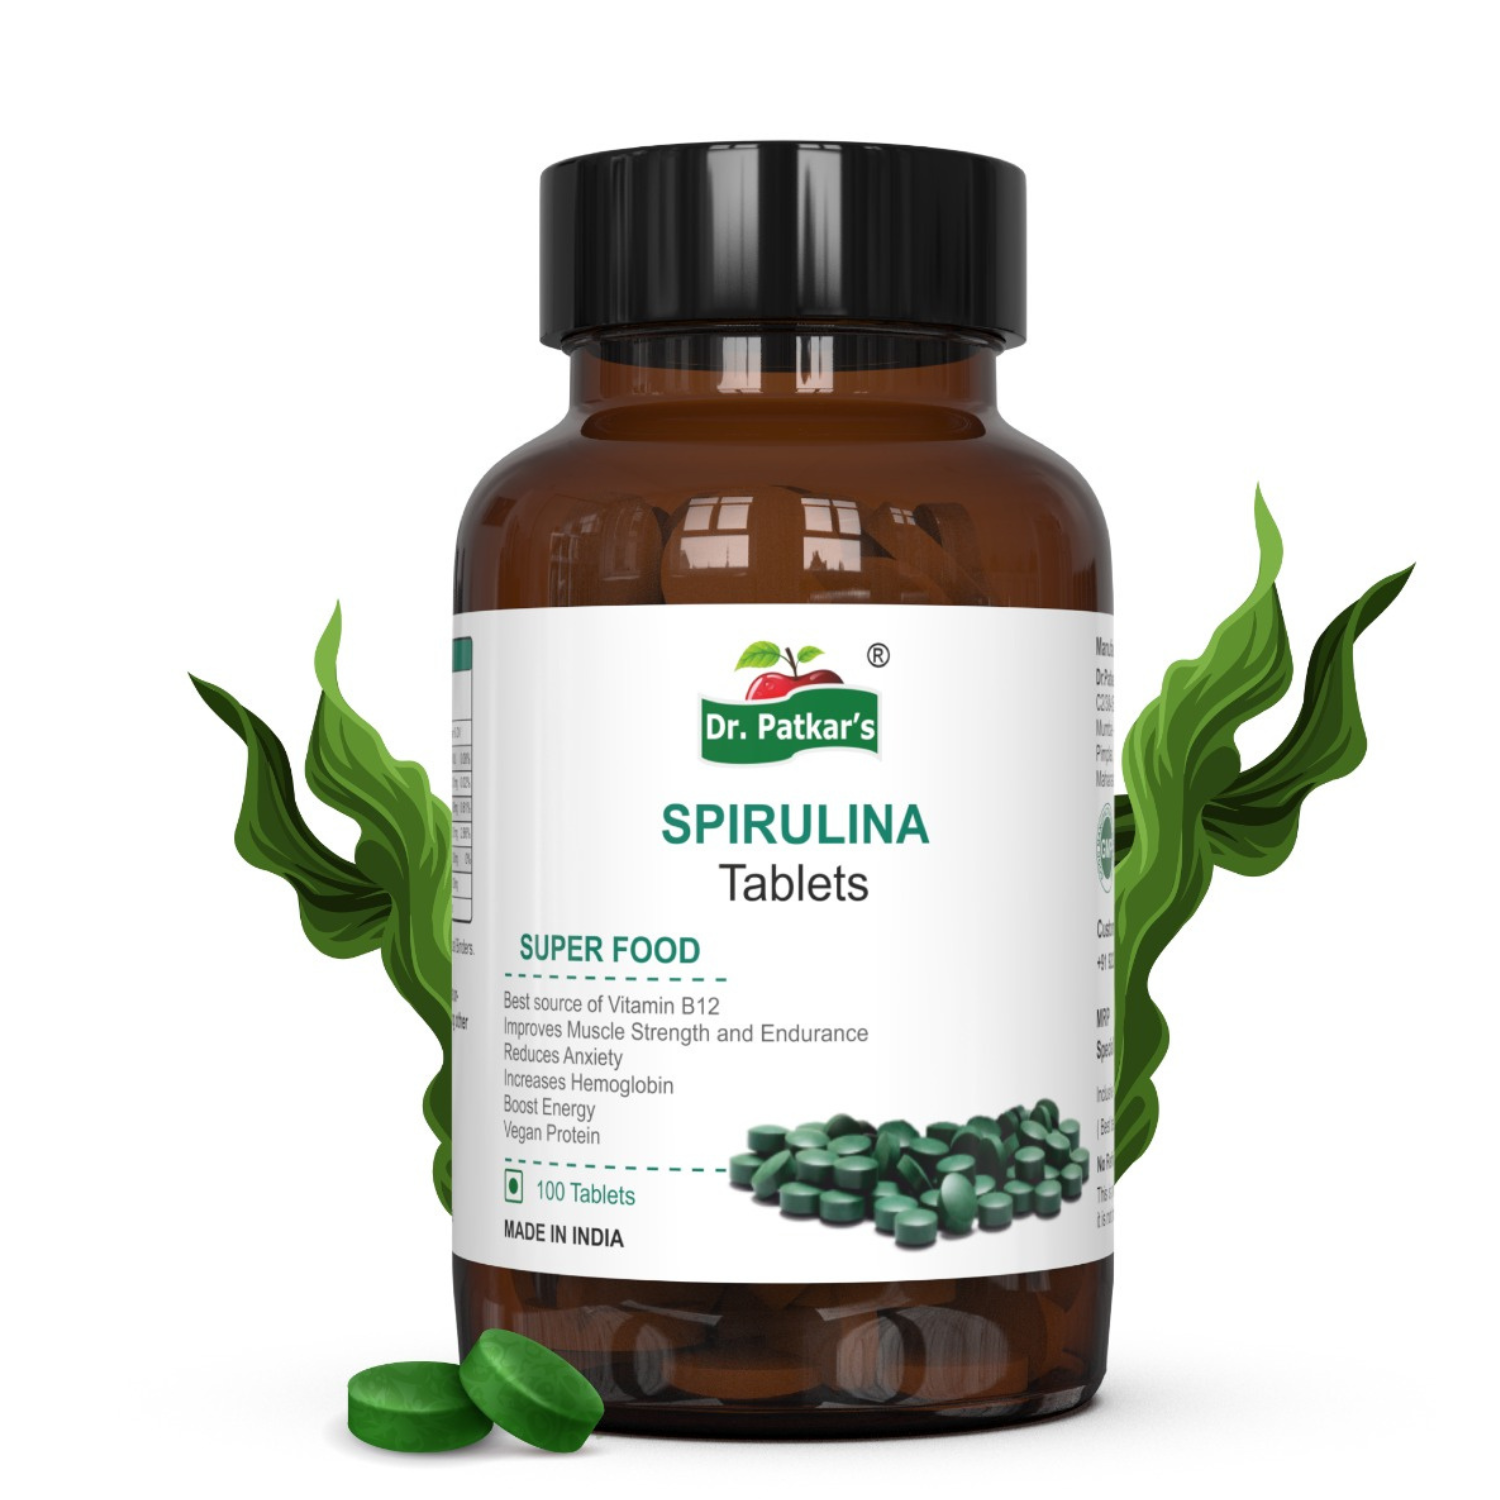 Natural Spirulina Tablets 2000mg per Serving - 100 Tablets | Immunity and Health Supplement | Metabolism Booster | Superfood and Nutritional Supplement | 100% Vegan